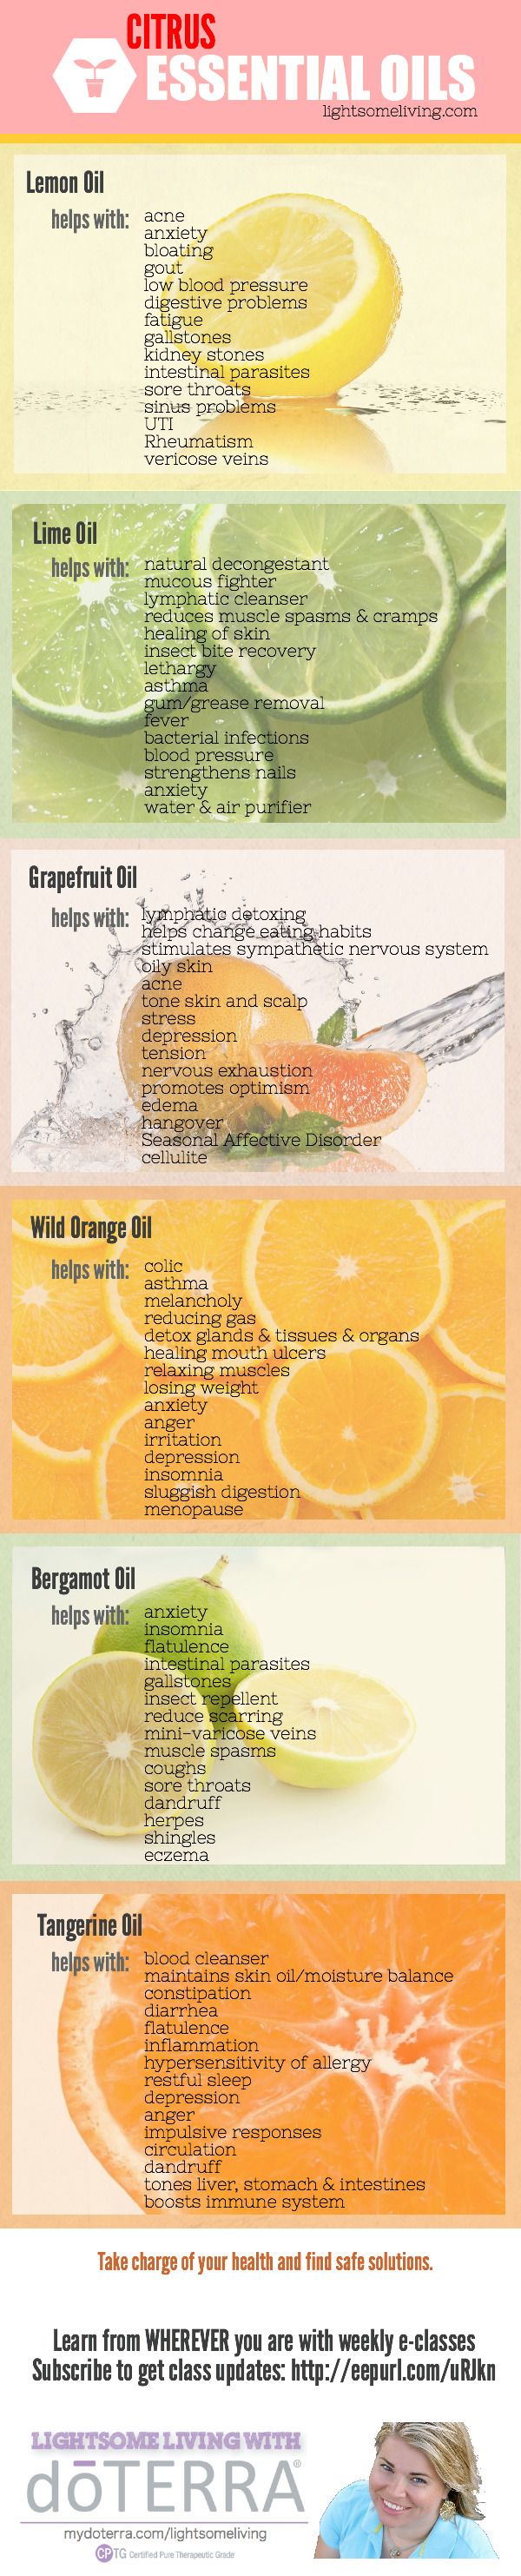 Everything About Citrus Essential Oils And Their Uses Infographic